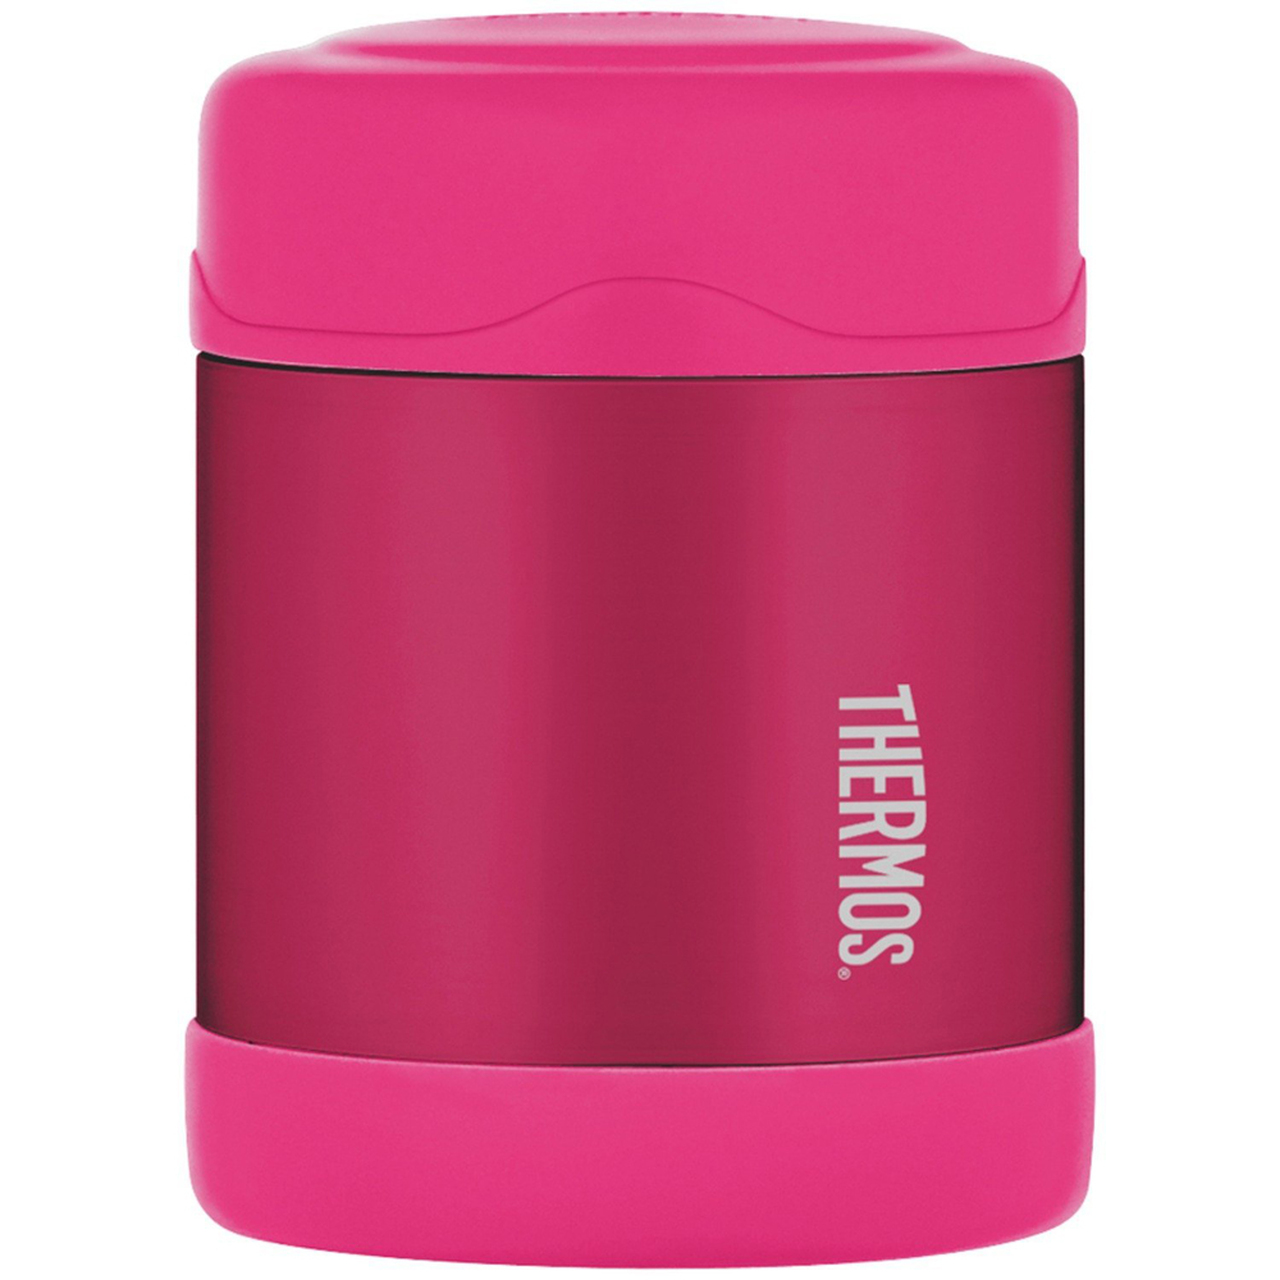 Thermos, 10 oz, Pink, Stainless Steel Vacuum Insulated Food Jar